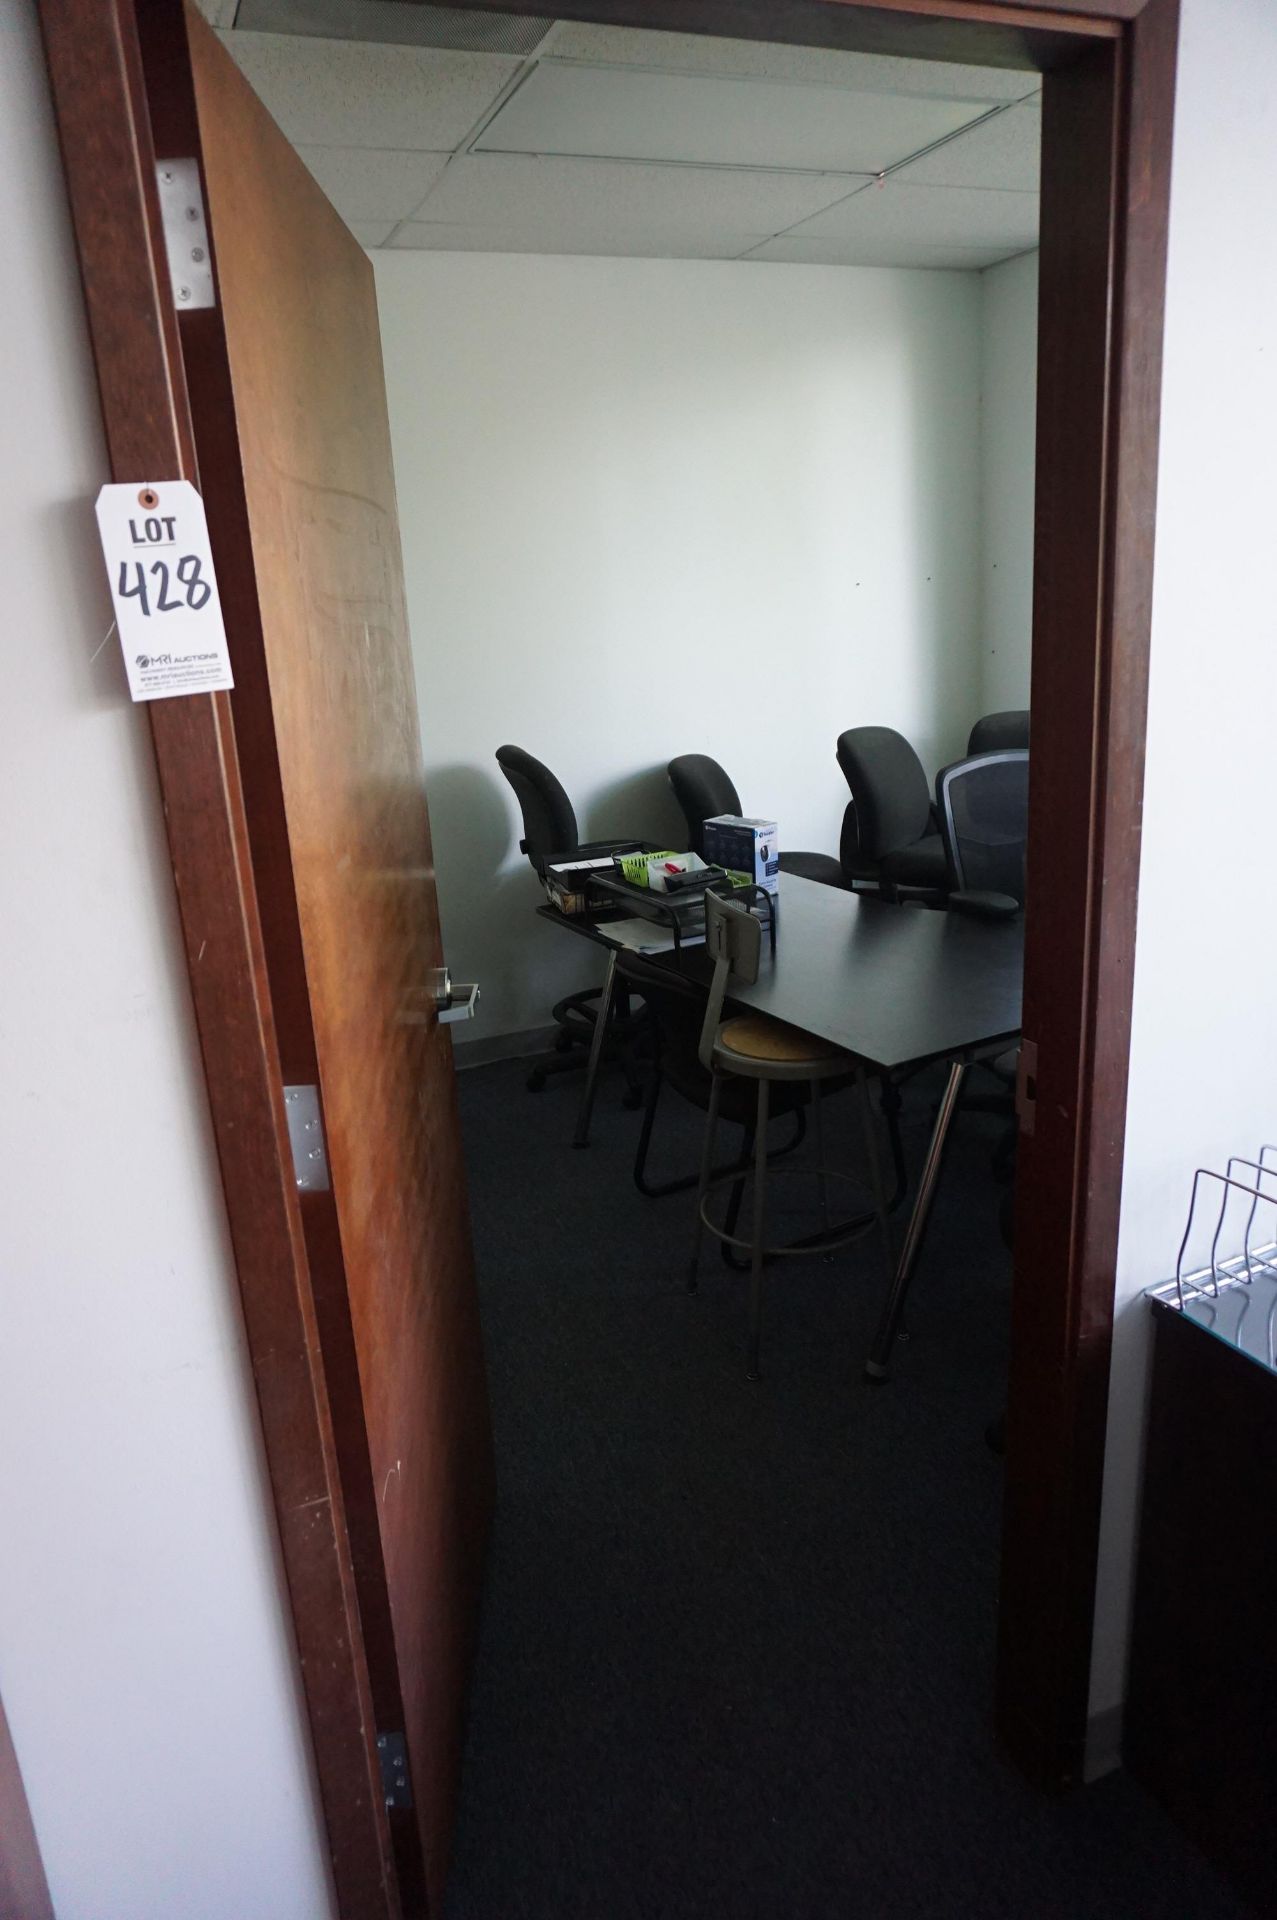 1ST FLOOR OFFICE WITH CONTENTS TO INCLUDE BUT NOT LIMITED TO: L DESK, STOOLS, ROLLING OFFICE CHAIRS,